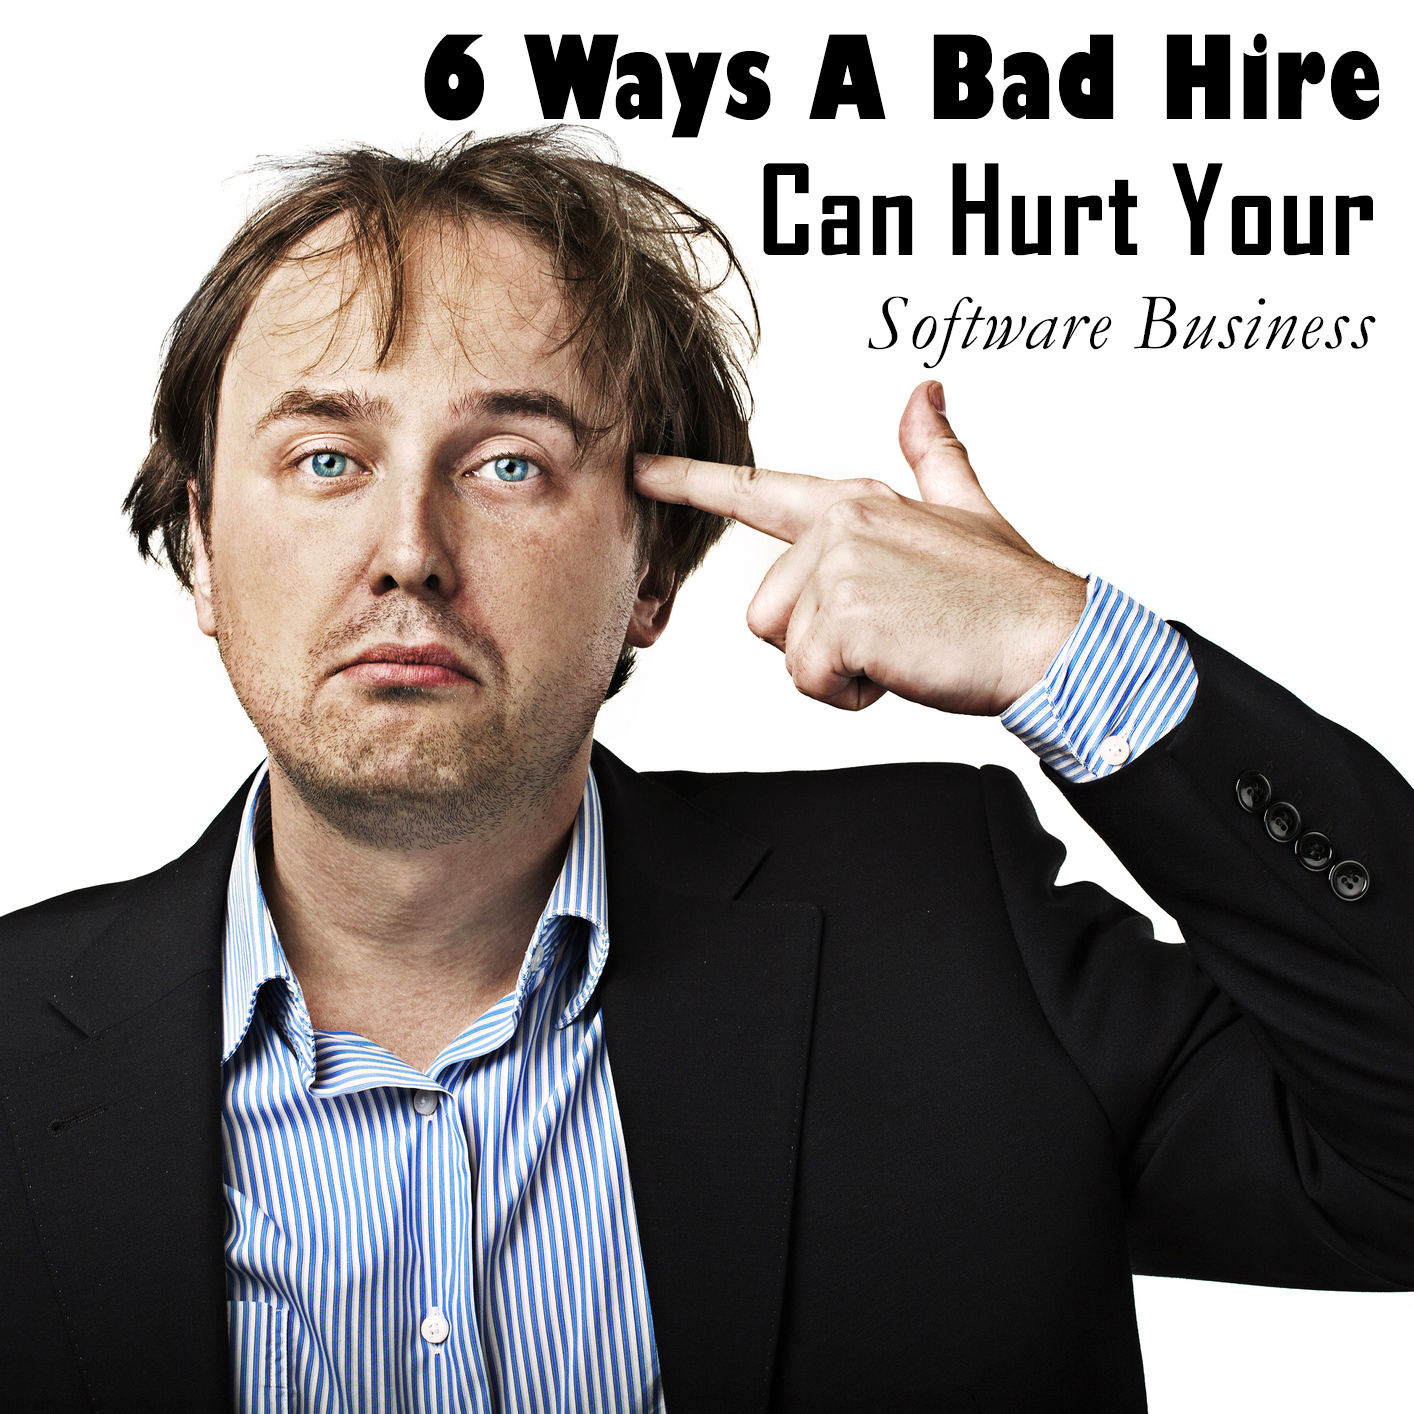 6 ways a bad hire can hurt your company